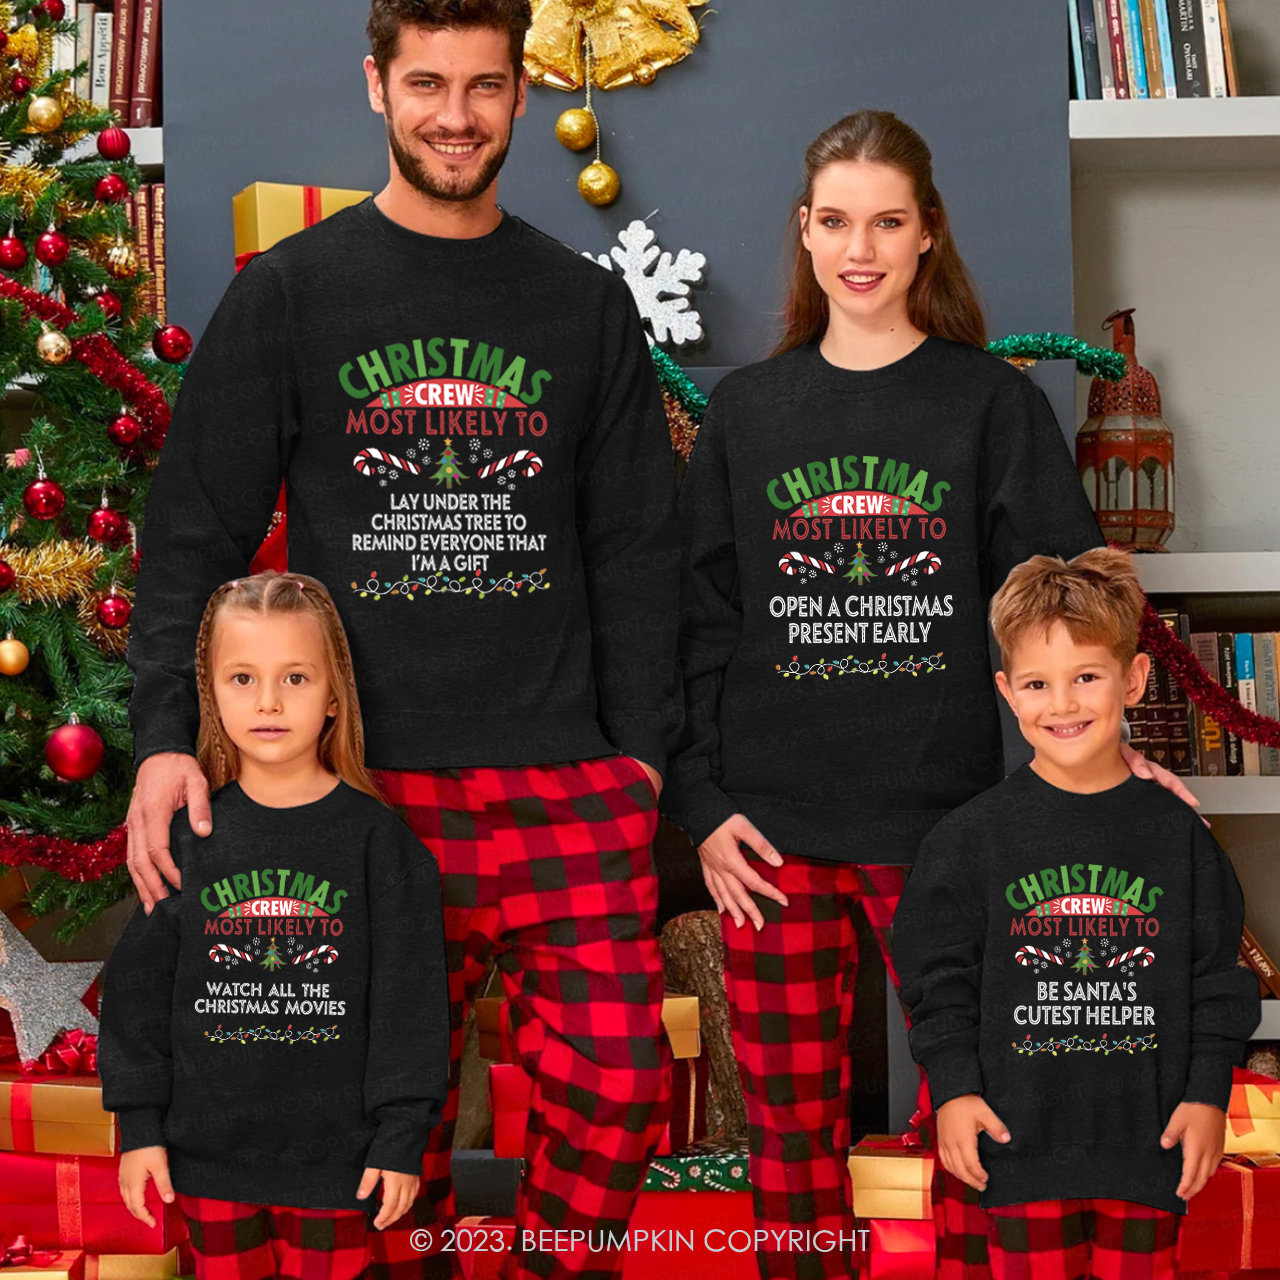 Christmas Crew Most Likely To Family Sweatshirts